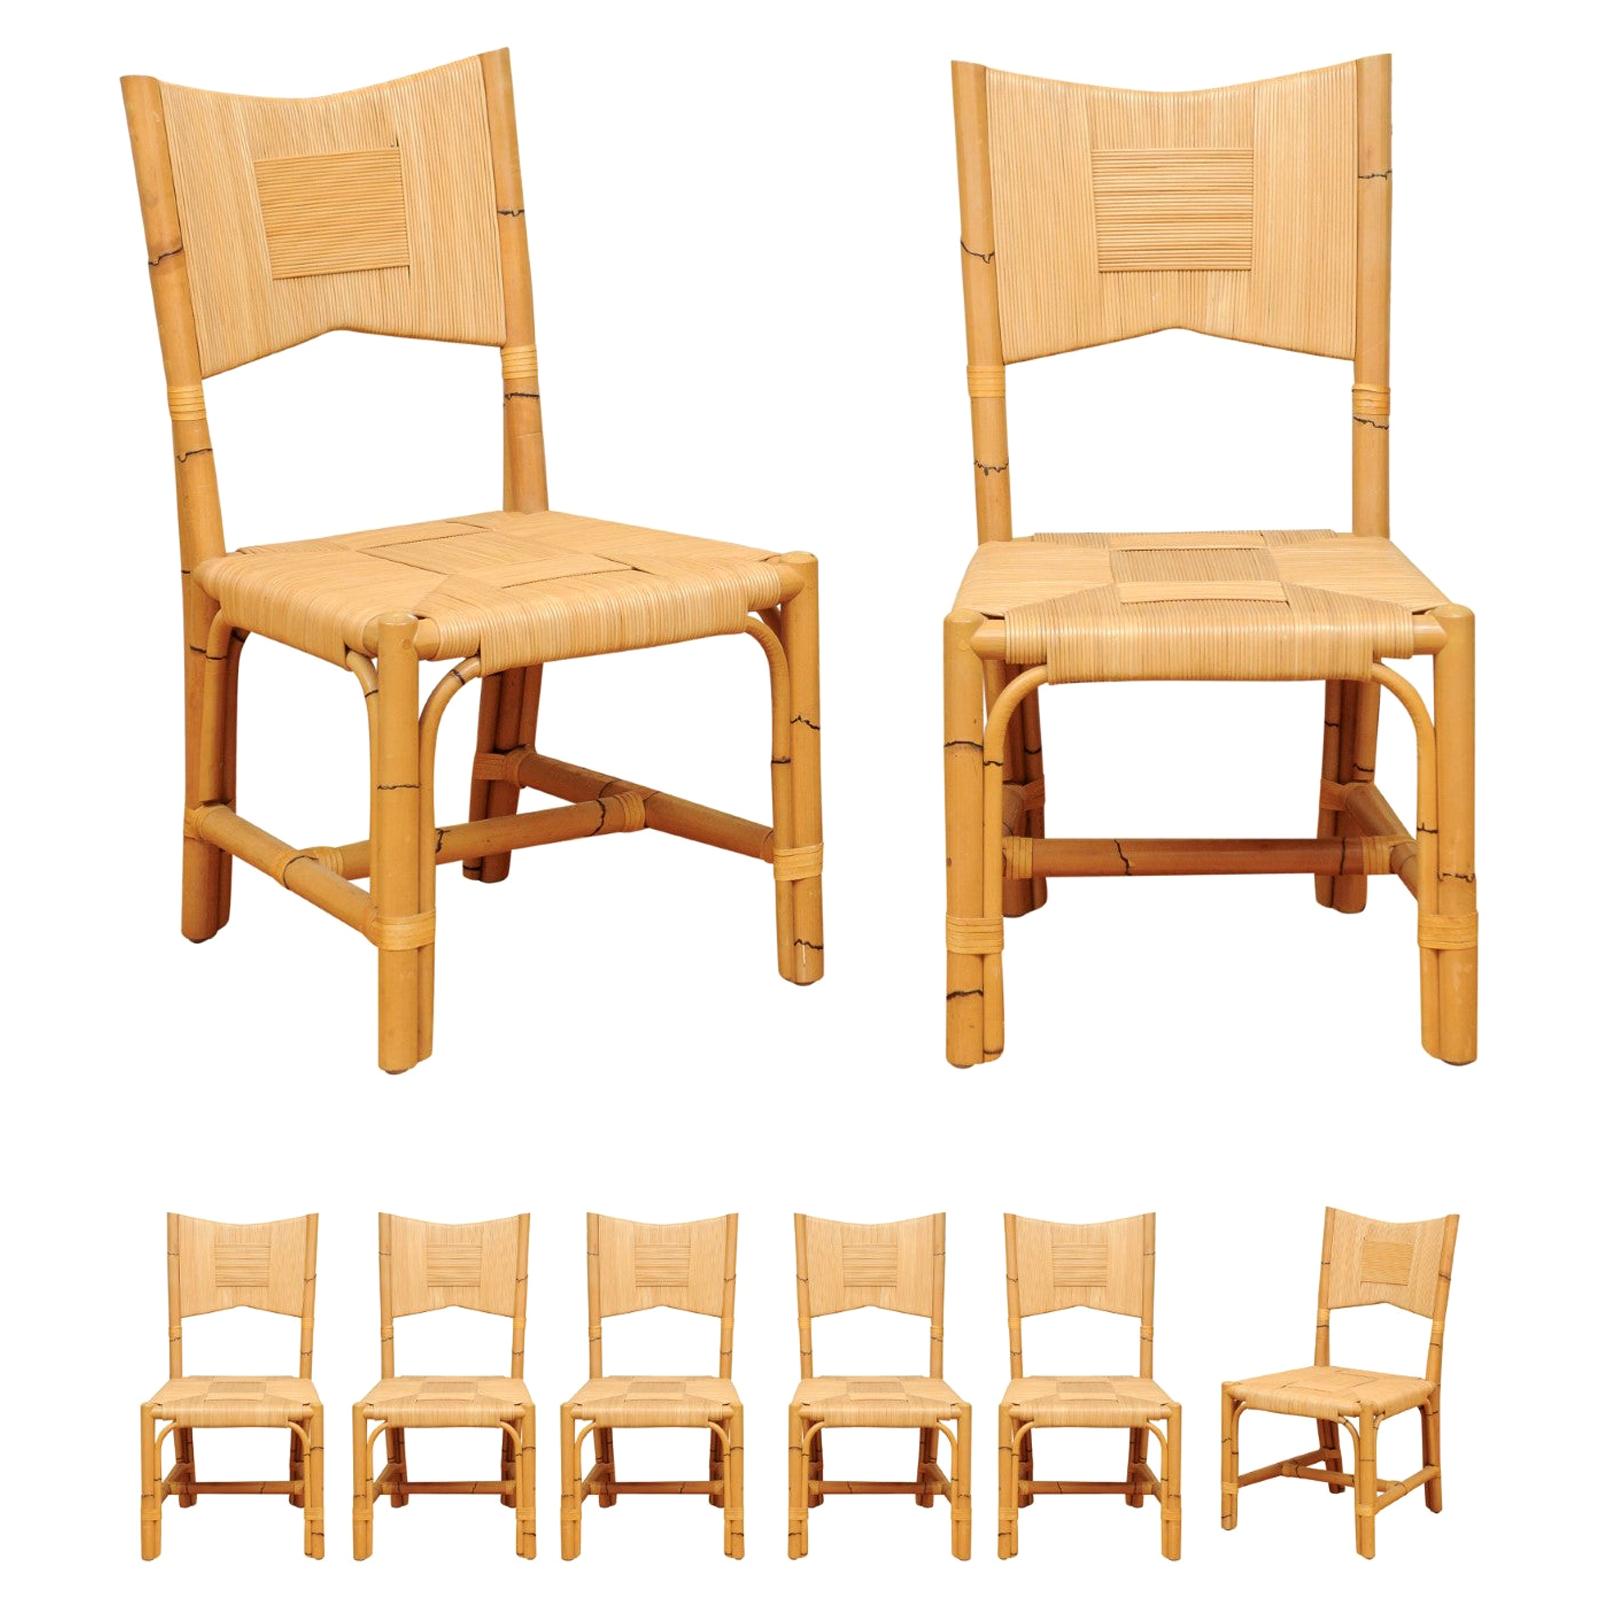 Superb Set of 8 Rush Rattan Dining Chairs by John Hutton for Donghia, circa 1995